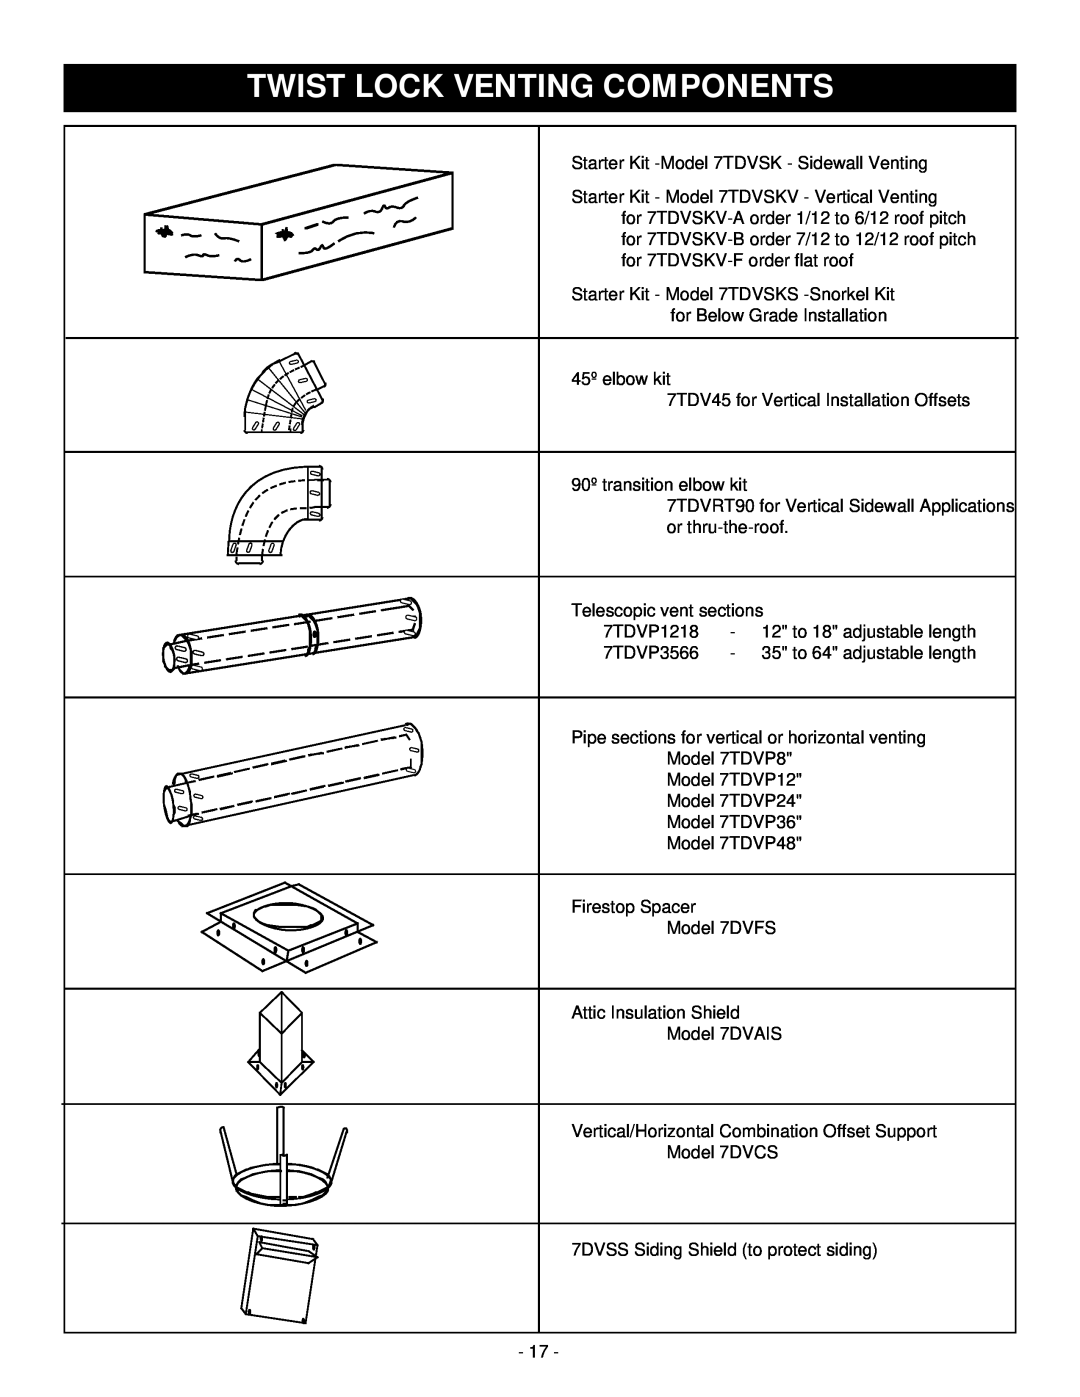 Vermont Casting D232 installation instructions Twist Lock Venting Components 